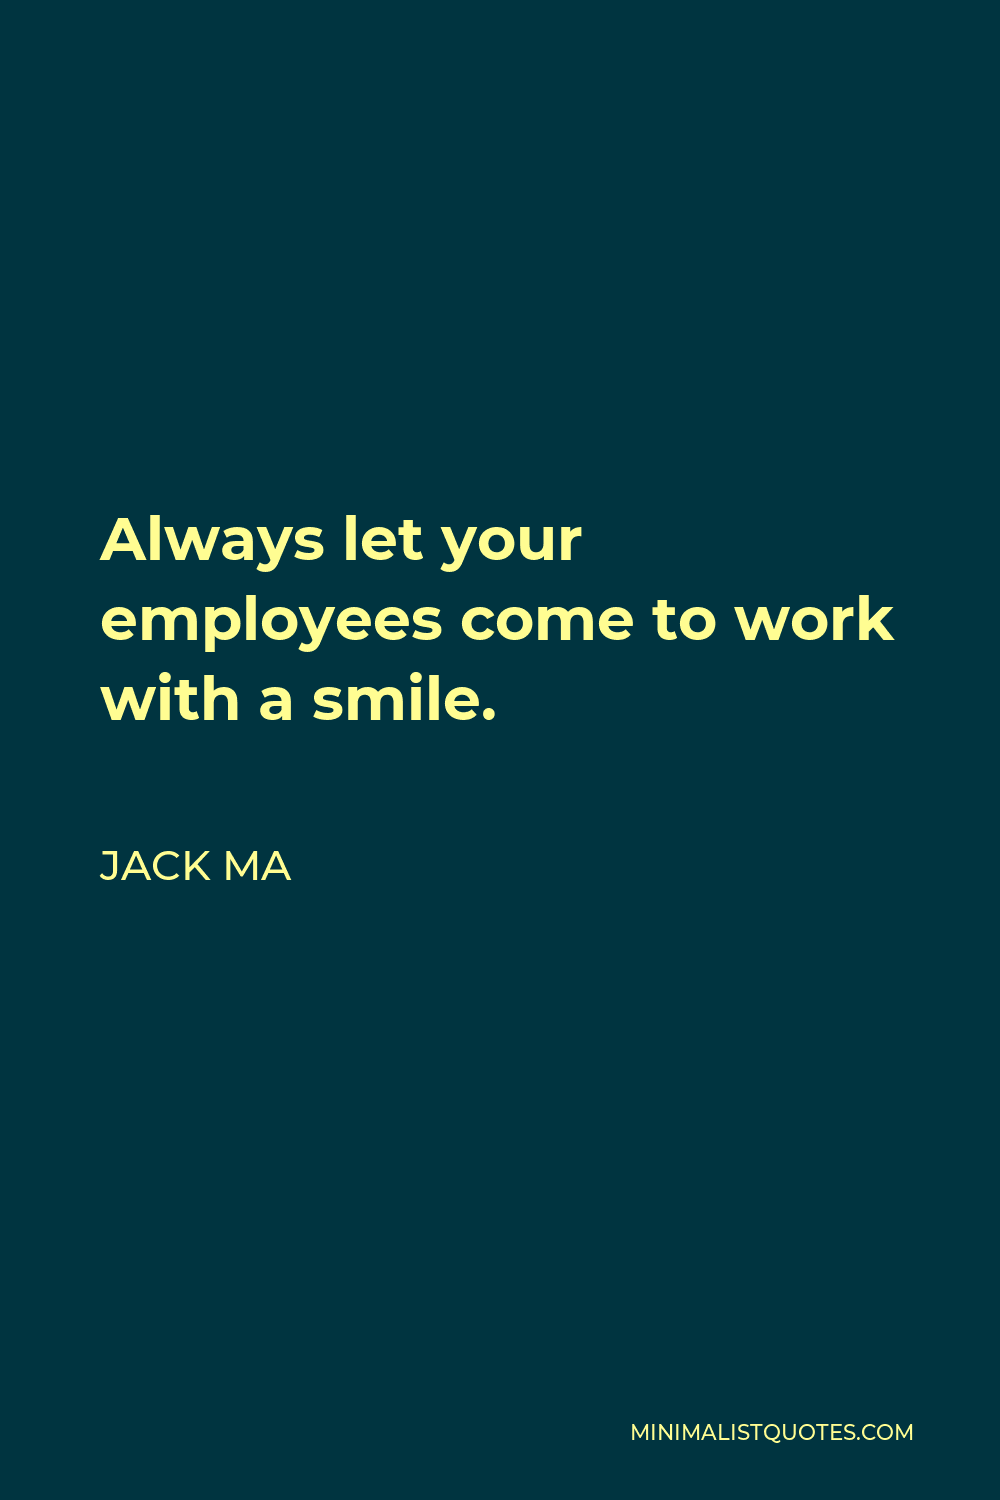 Jack Ma Quote - Always let your employees come to work with a smile.